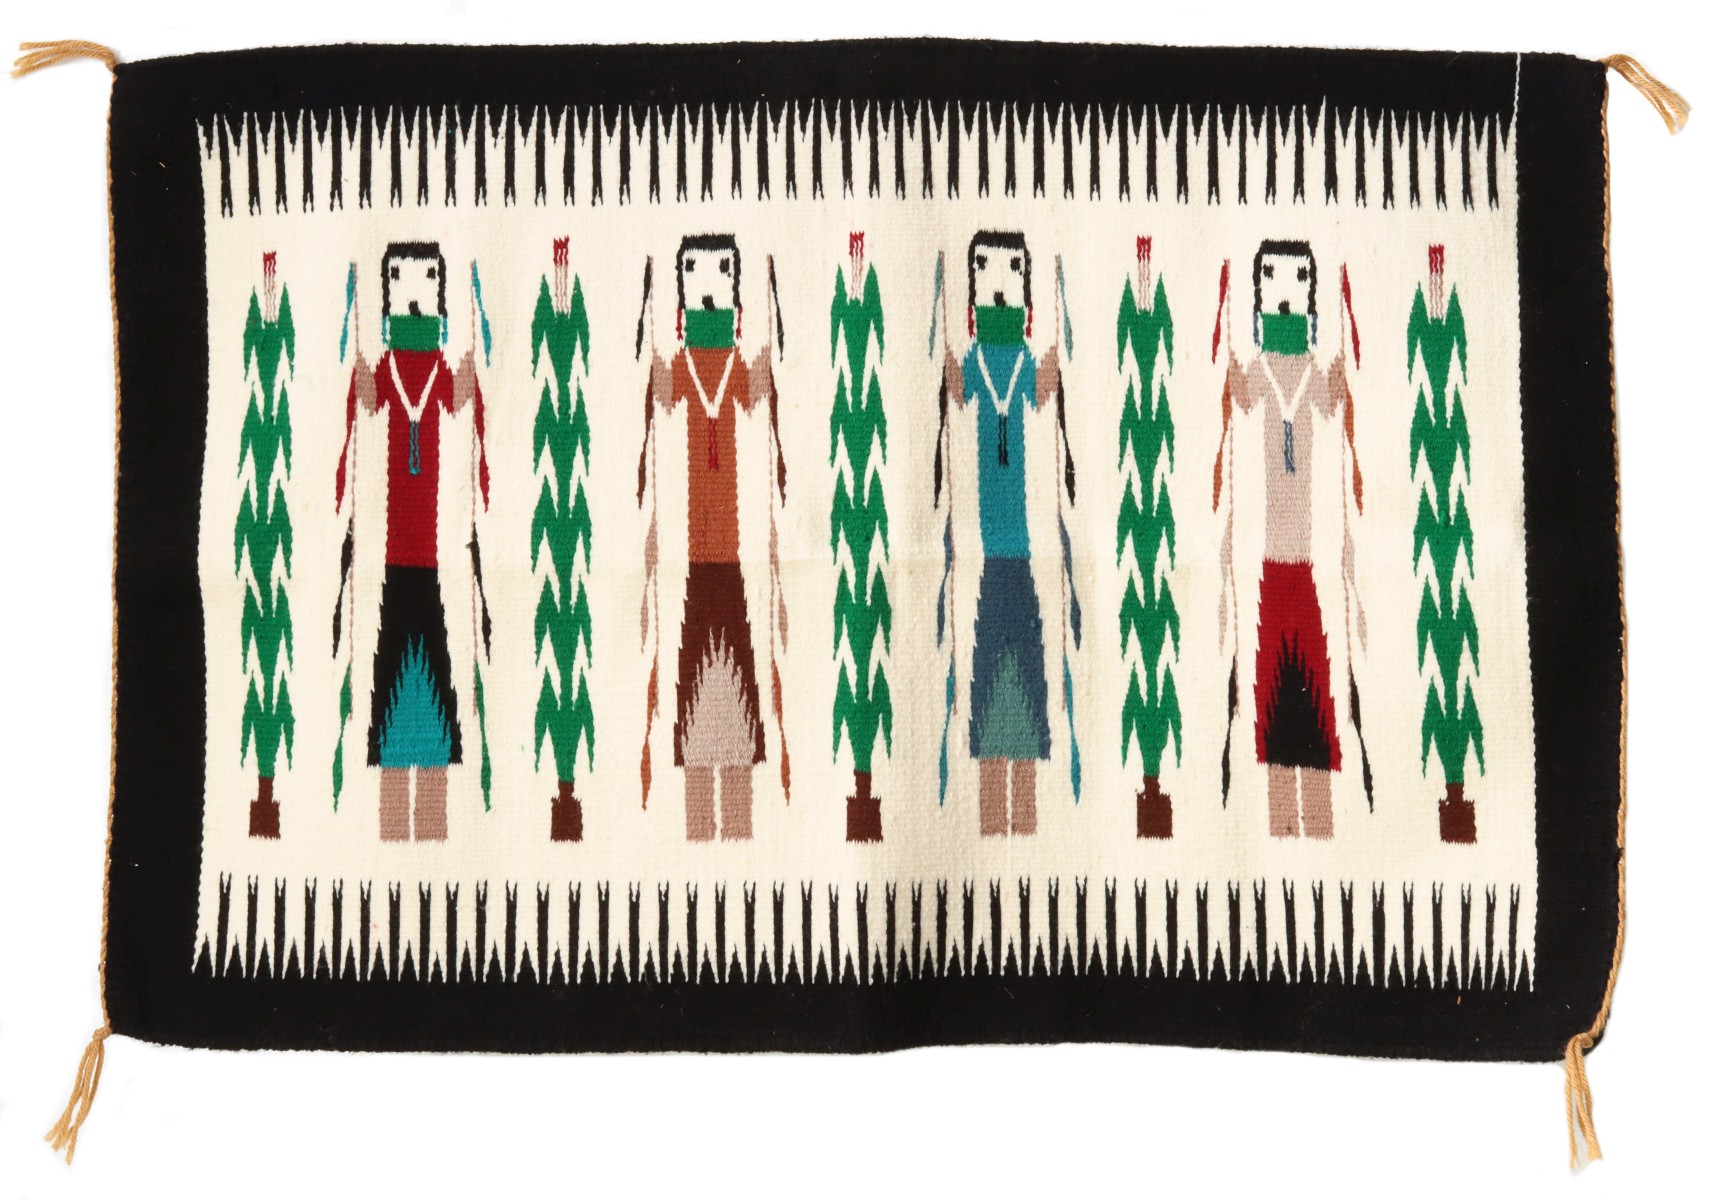 A LATE 20TH C. TWELVE COLOR NAVAJO RUG WITH YEI FIGURES